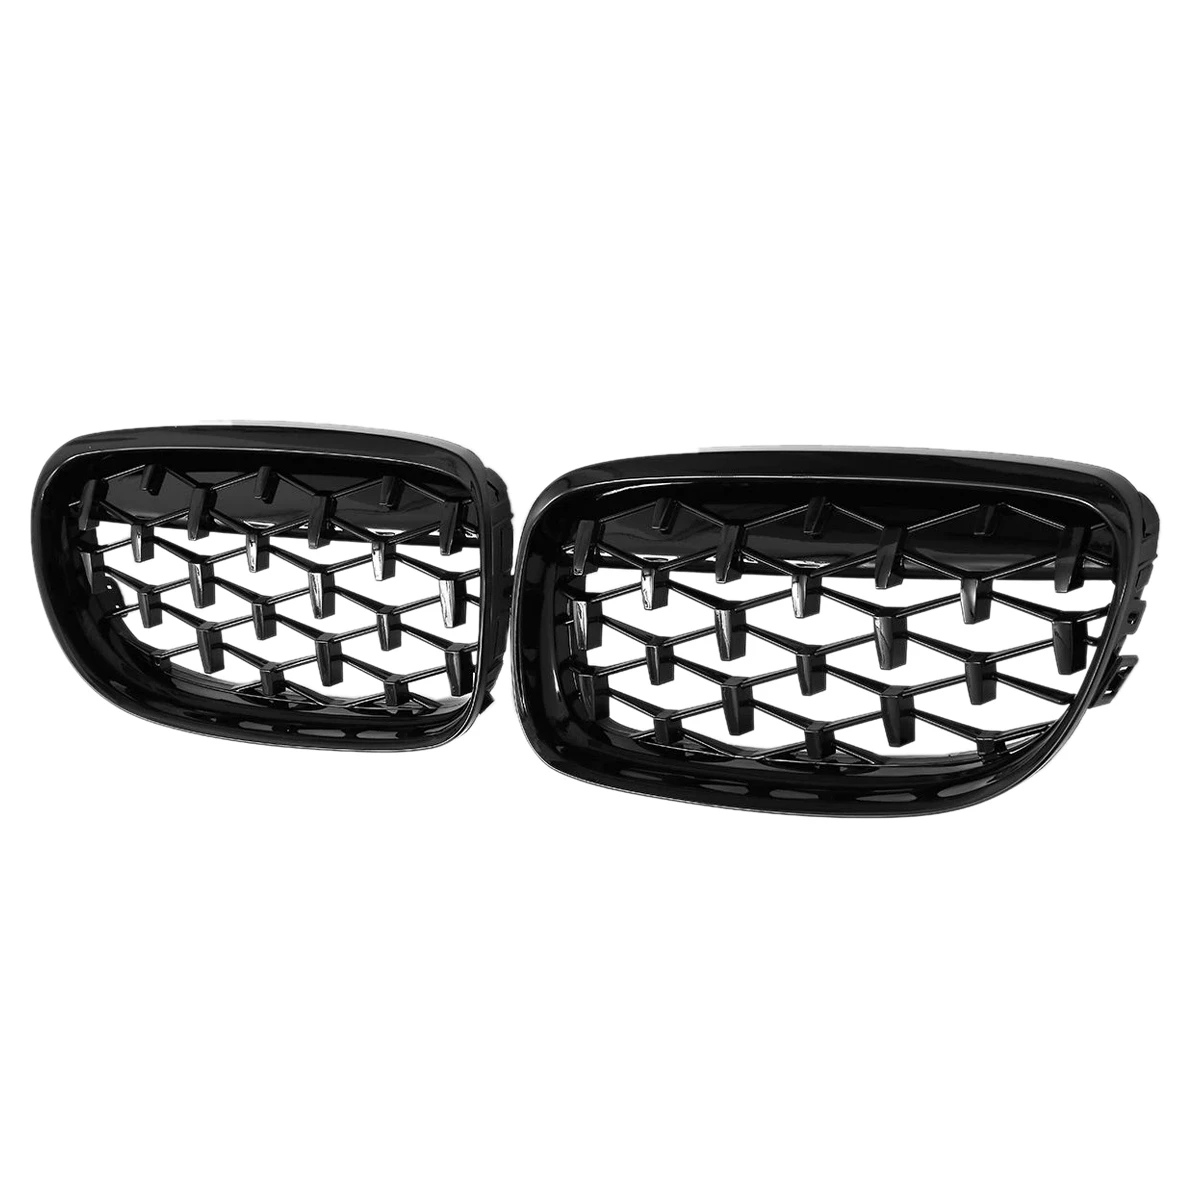 

2Pcs Car Front Bumper Hood Kidney Grille Diamond Meteor Racing Grill Glossy Black for -BMW 3 Series E90 2009-2012